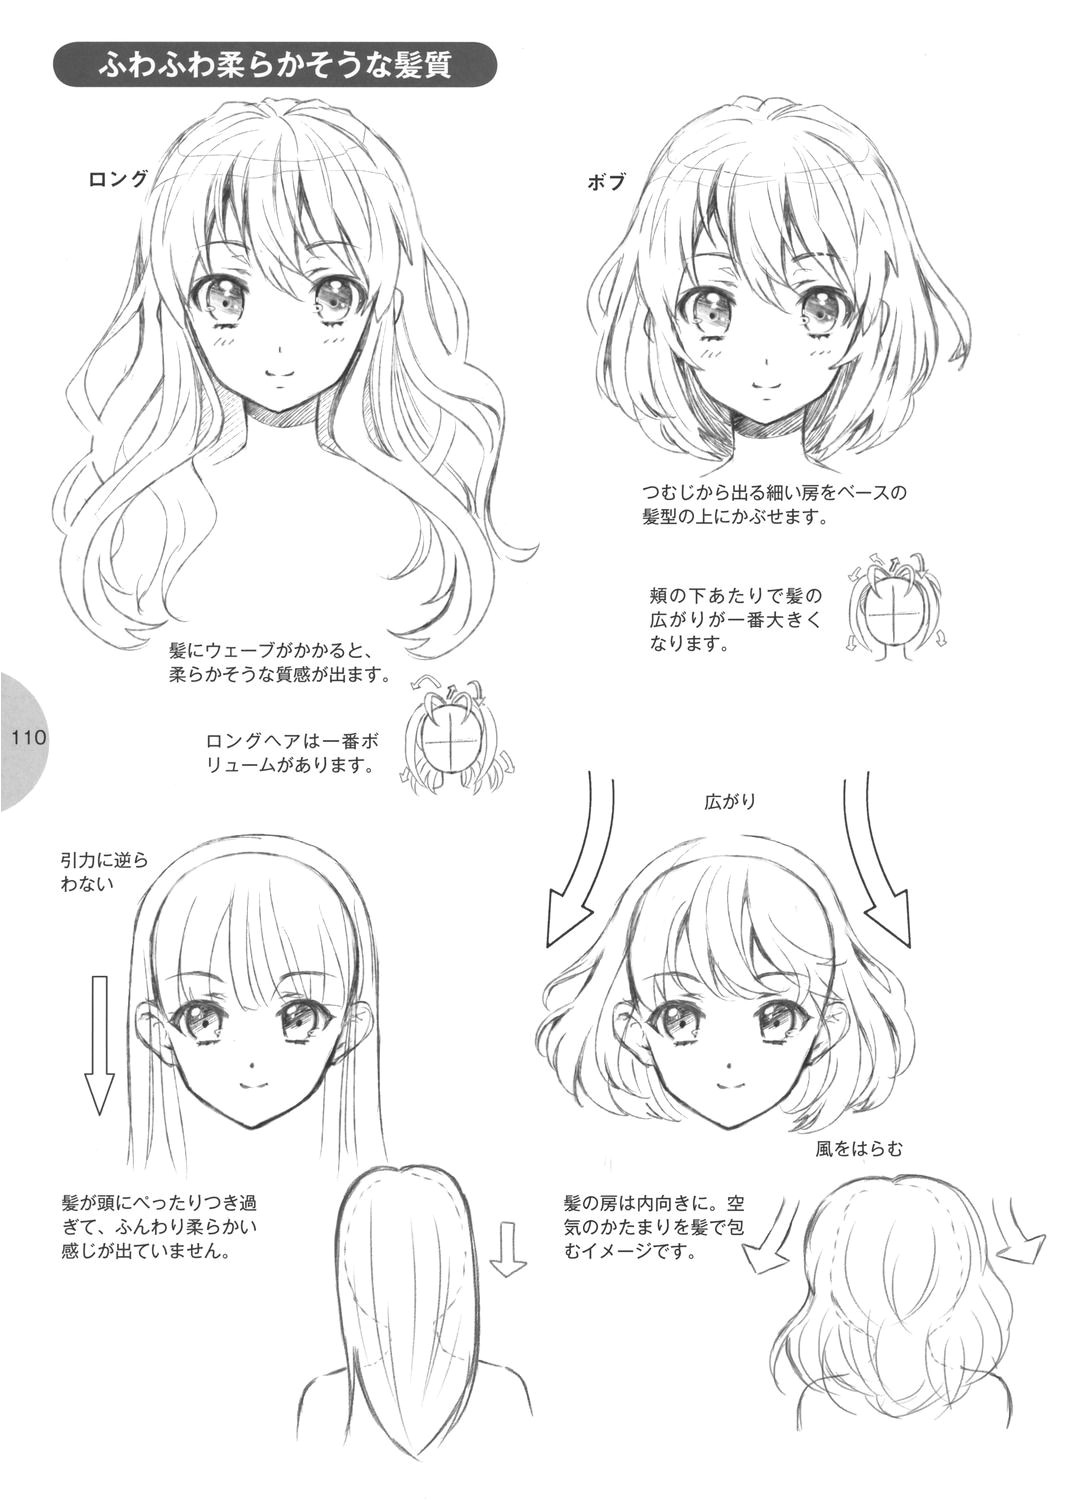 Anime Hairstyles Step by Step Tutorial Hair How to Draw